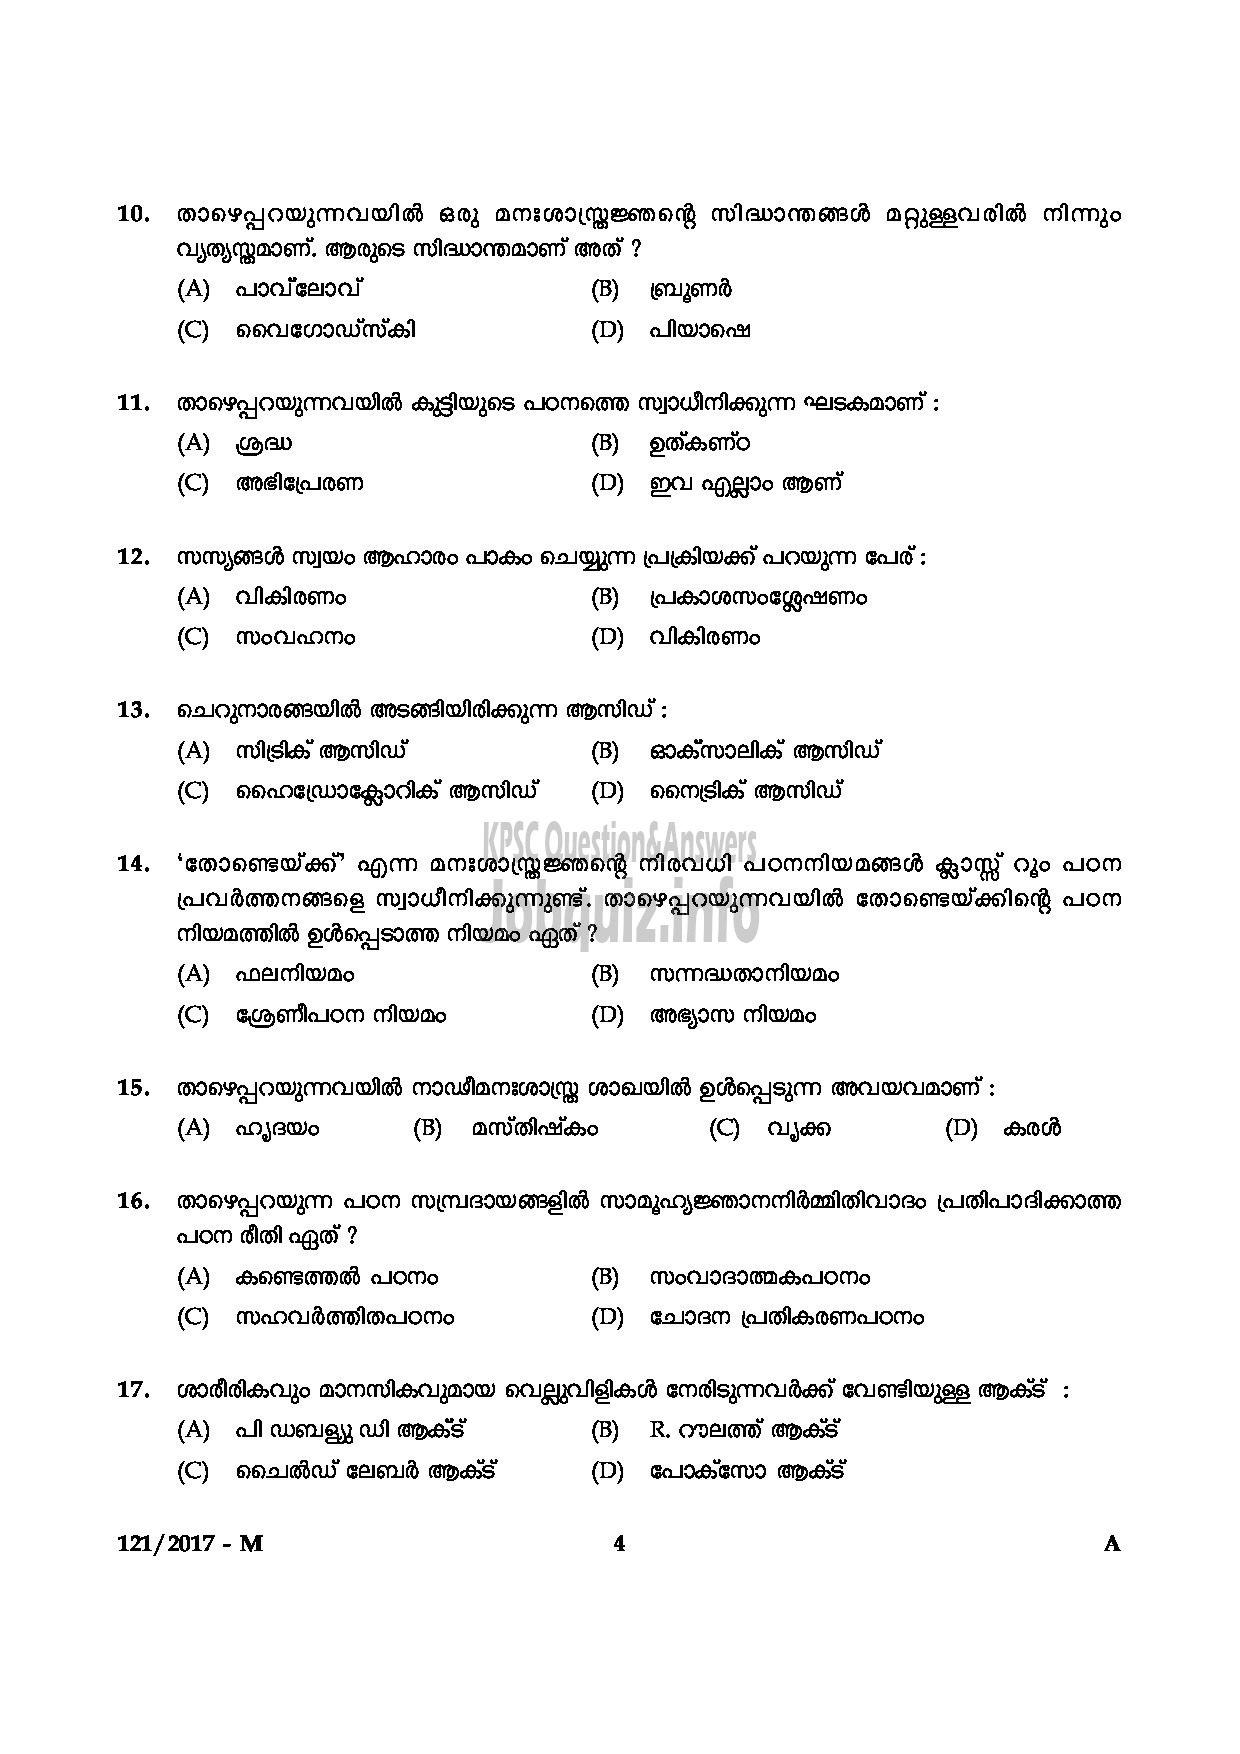 Kerala PSC Question Paper - PRE PRIMARY TEACHER EDUCATION MALAYALAM QUESTION -4